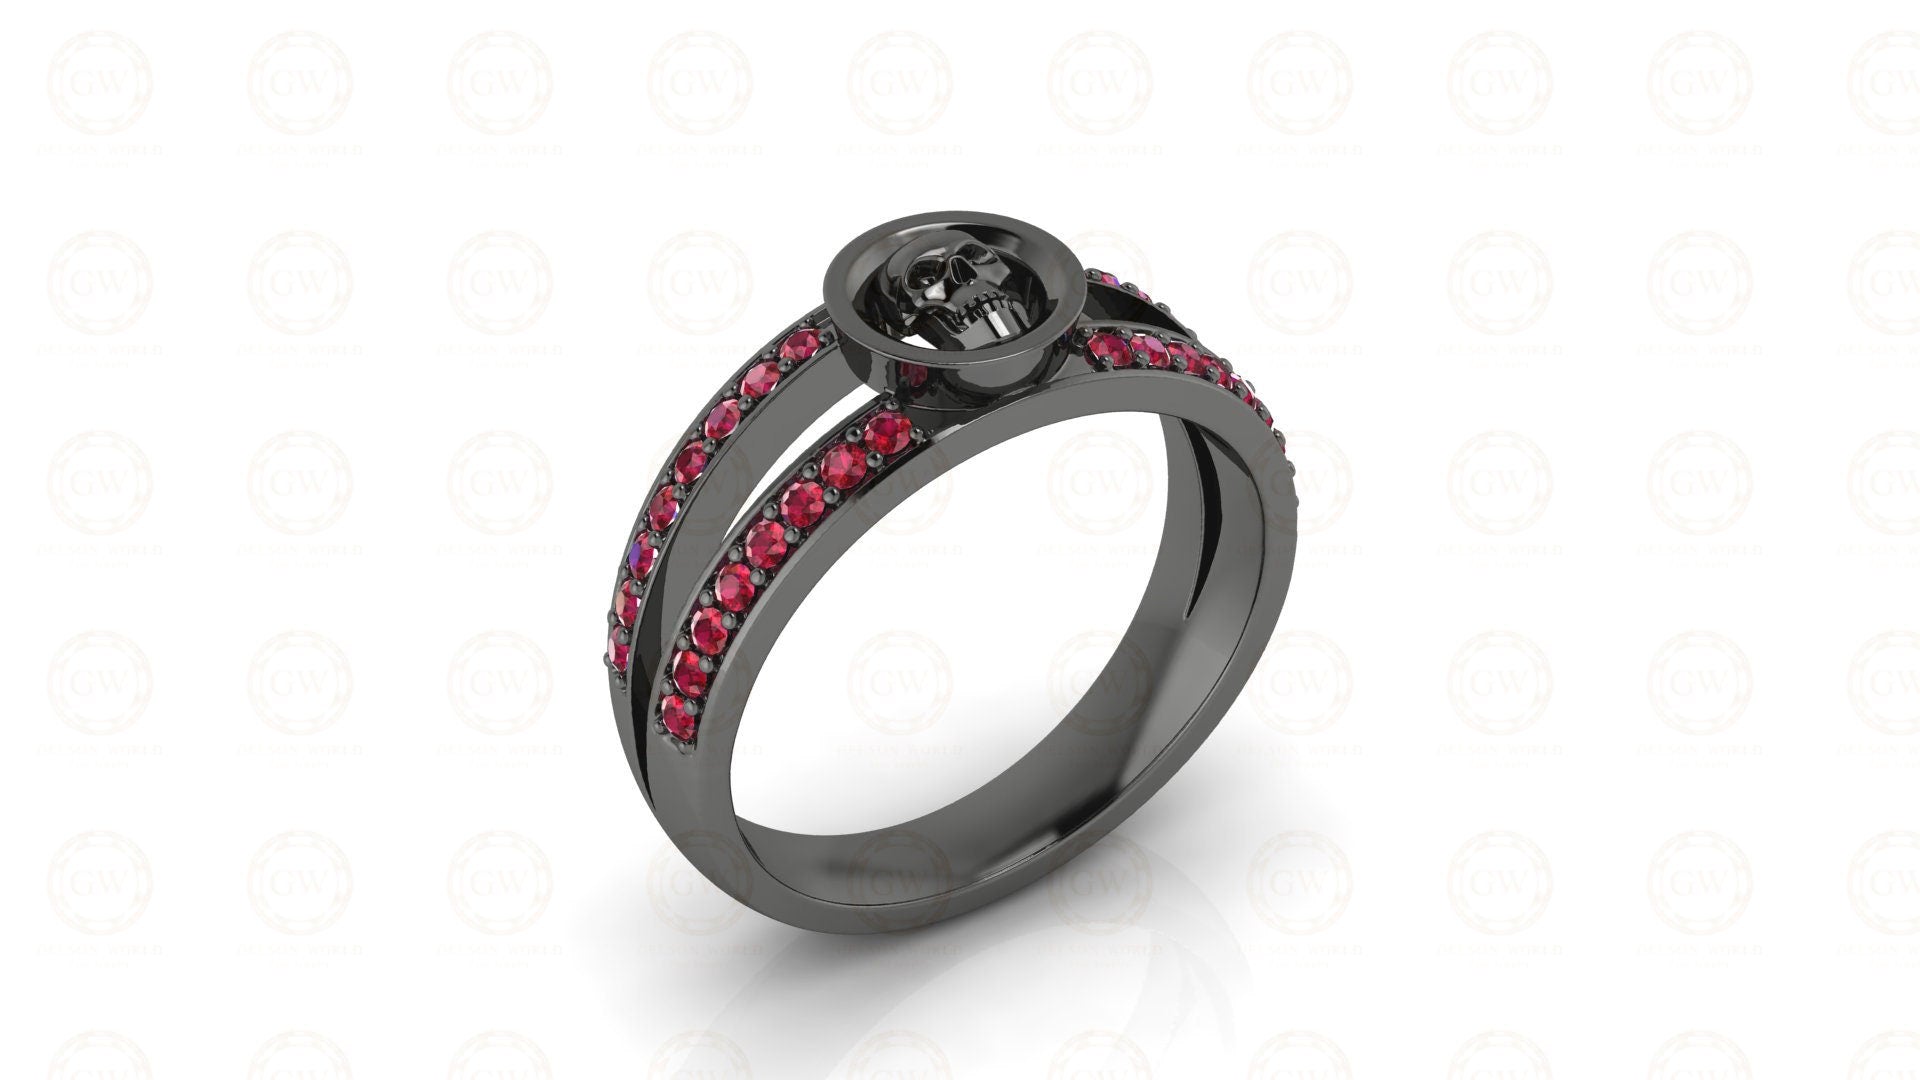 Unique Women Black Skull Engagement Ring, Sterling Silver, Birthstone July Ruby gemstone Women ring, Sterling Silver, Gift for her